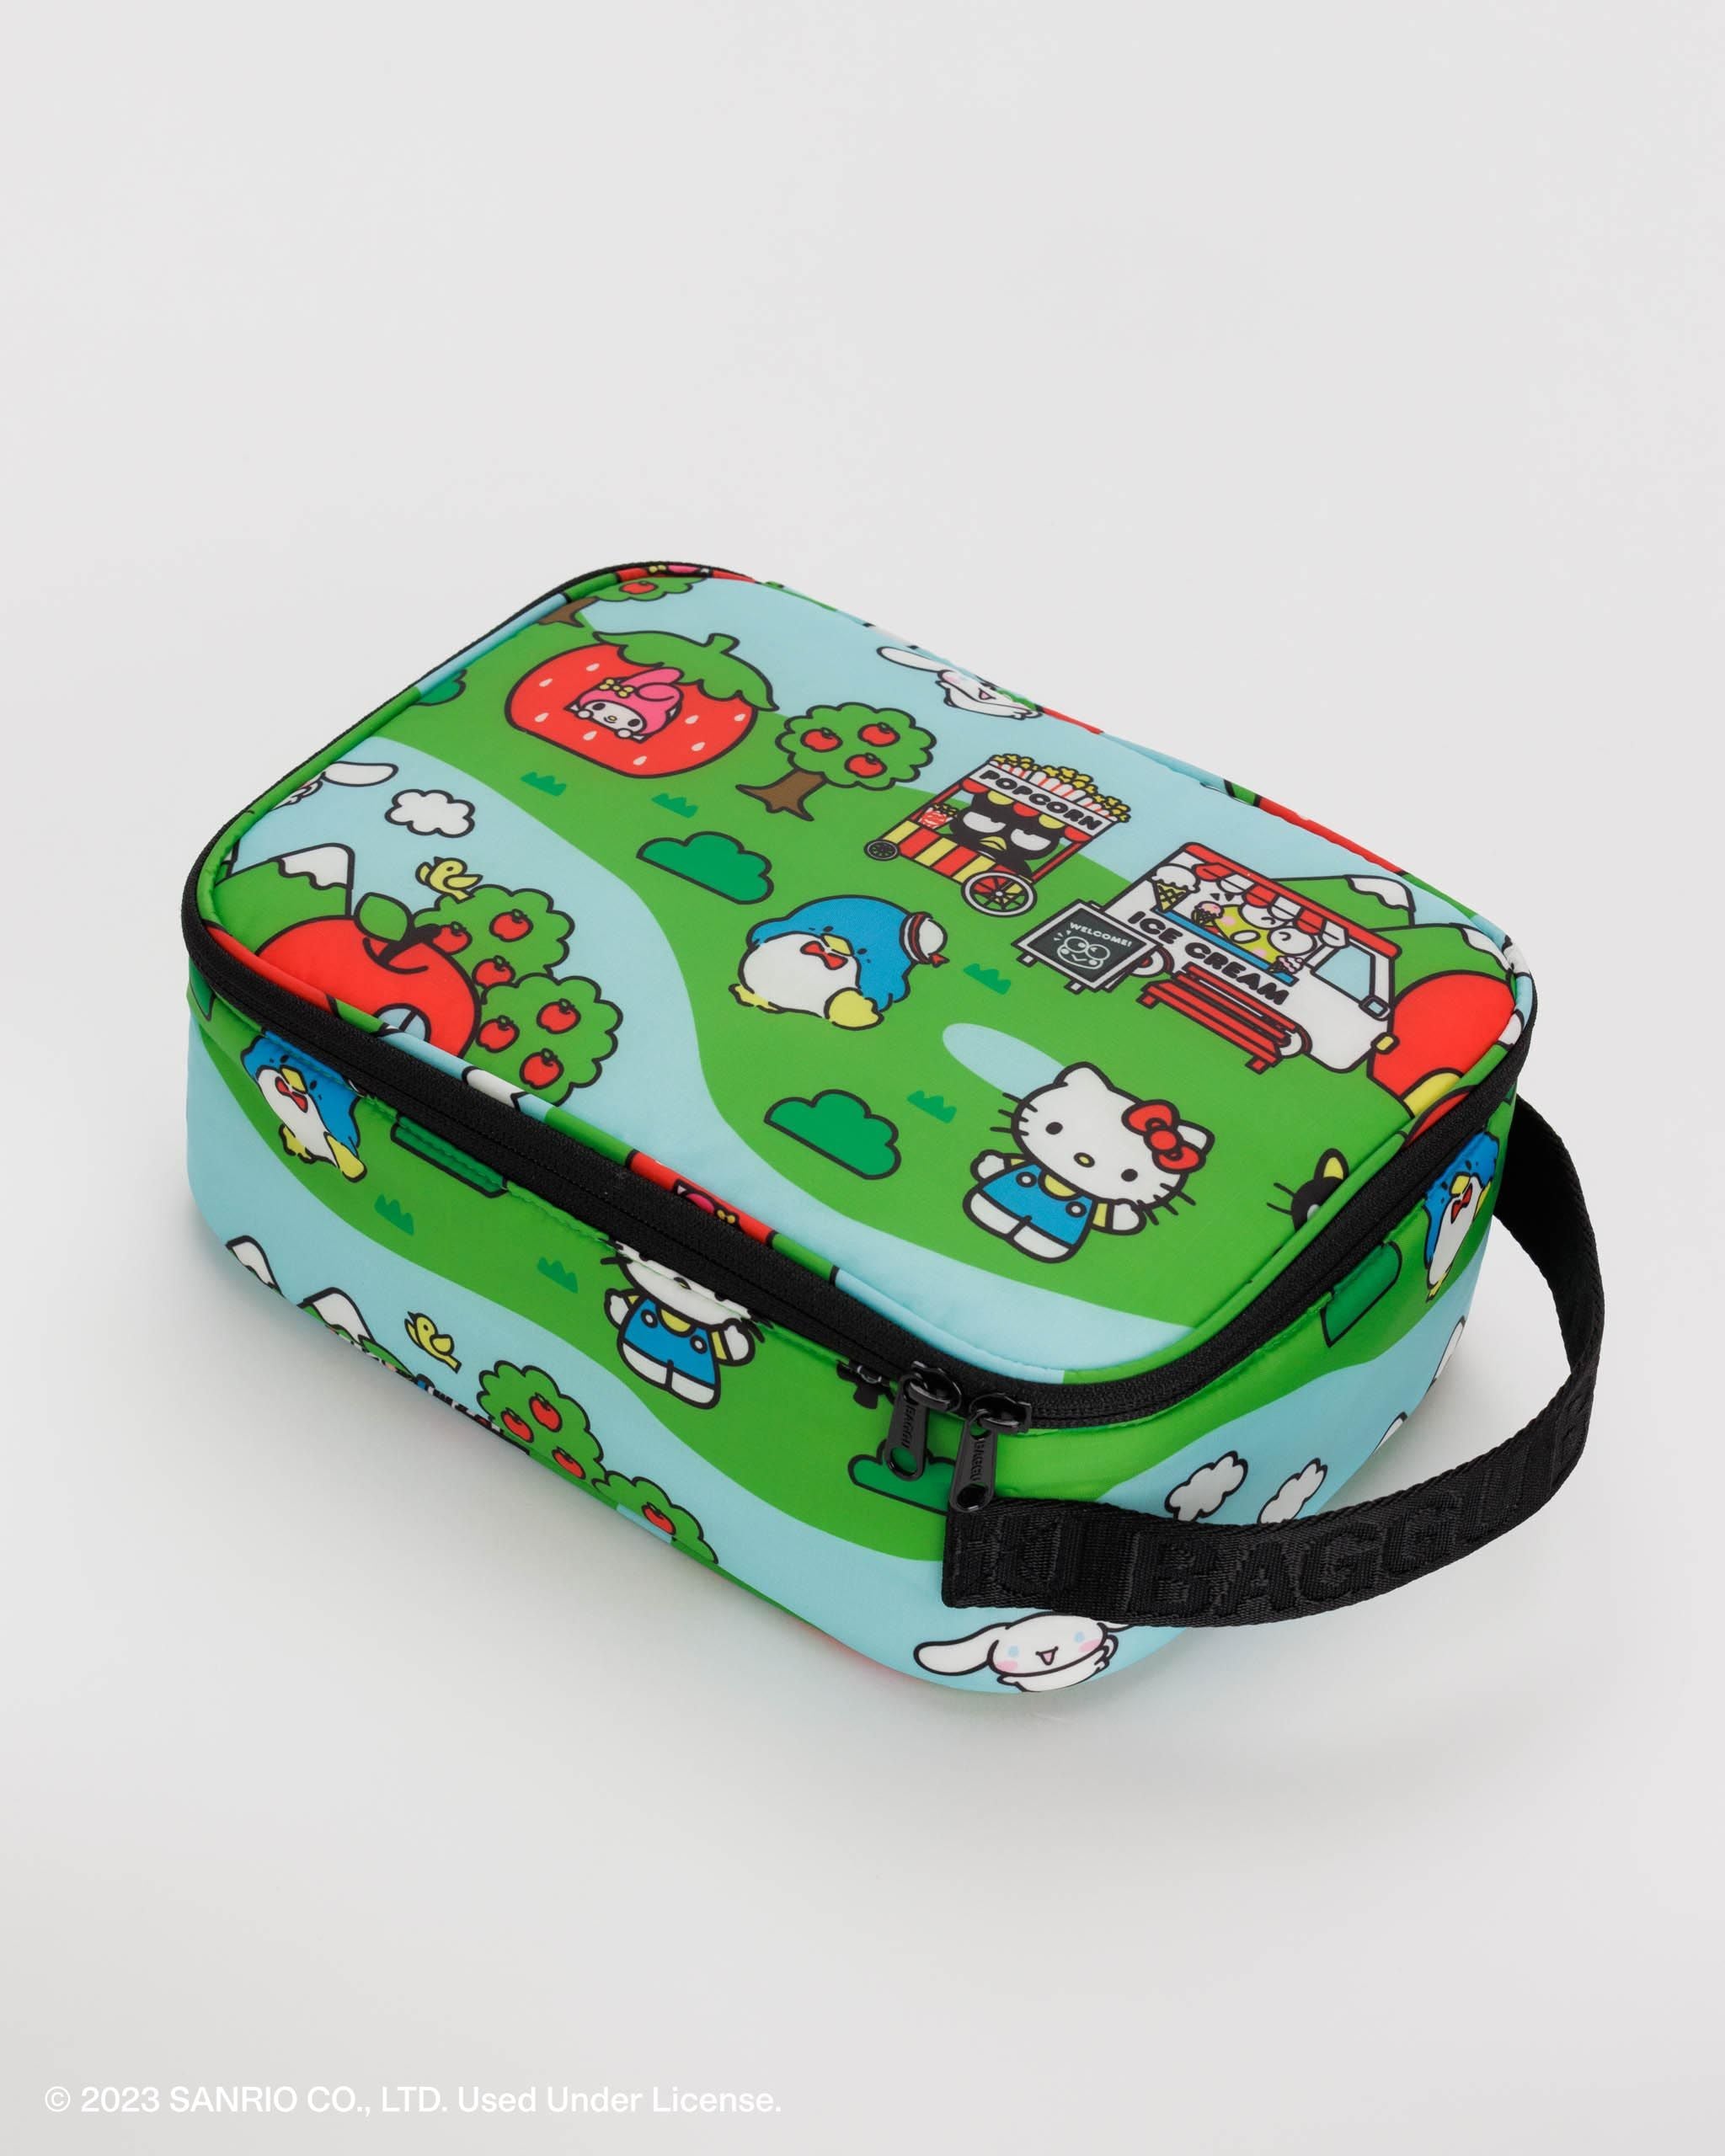 Hello Kitty® Hearts Lunch Boxes